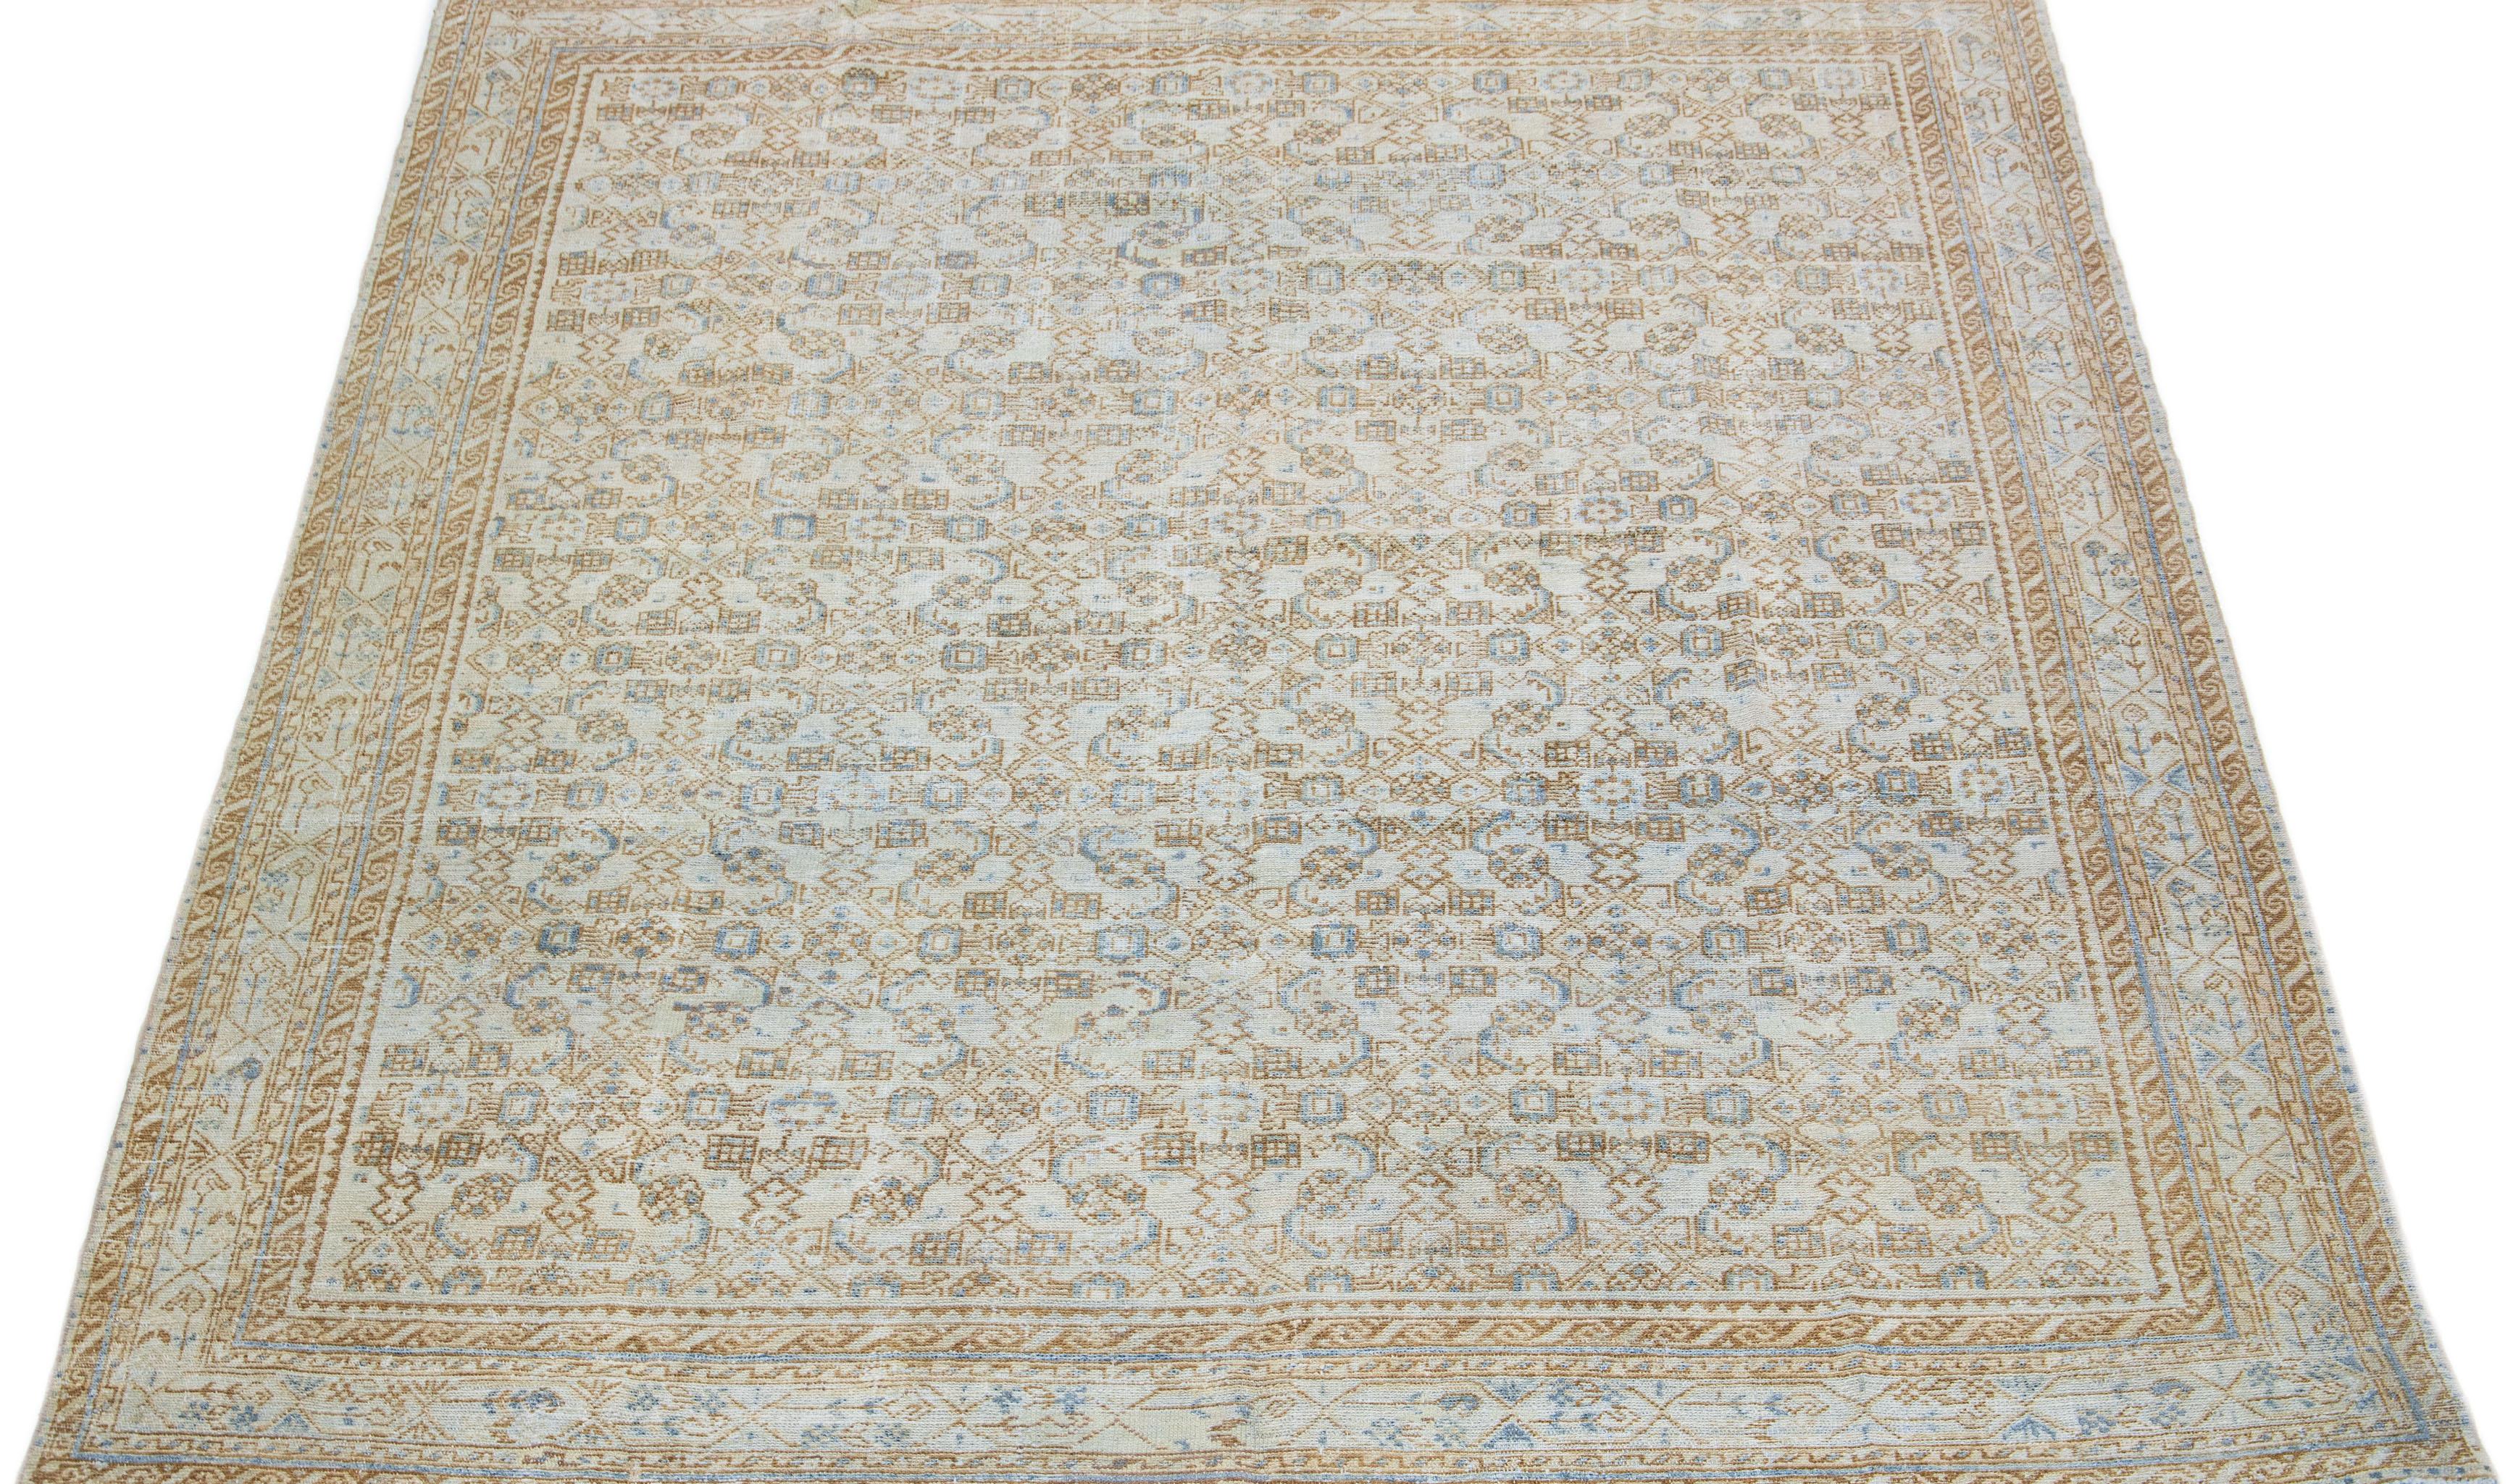 This hand-knotted Persian antique mahal wool rug features a beige field with exquisite blue accents cast across it in an all-over pattern.

This rug measures 8' x 9'9